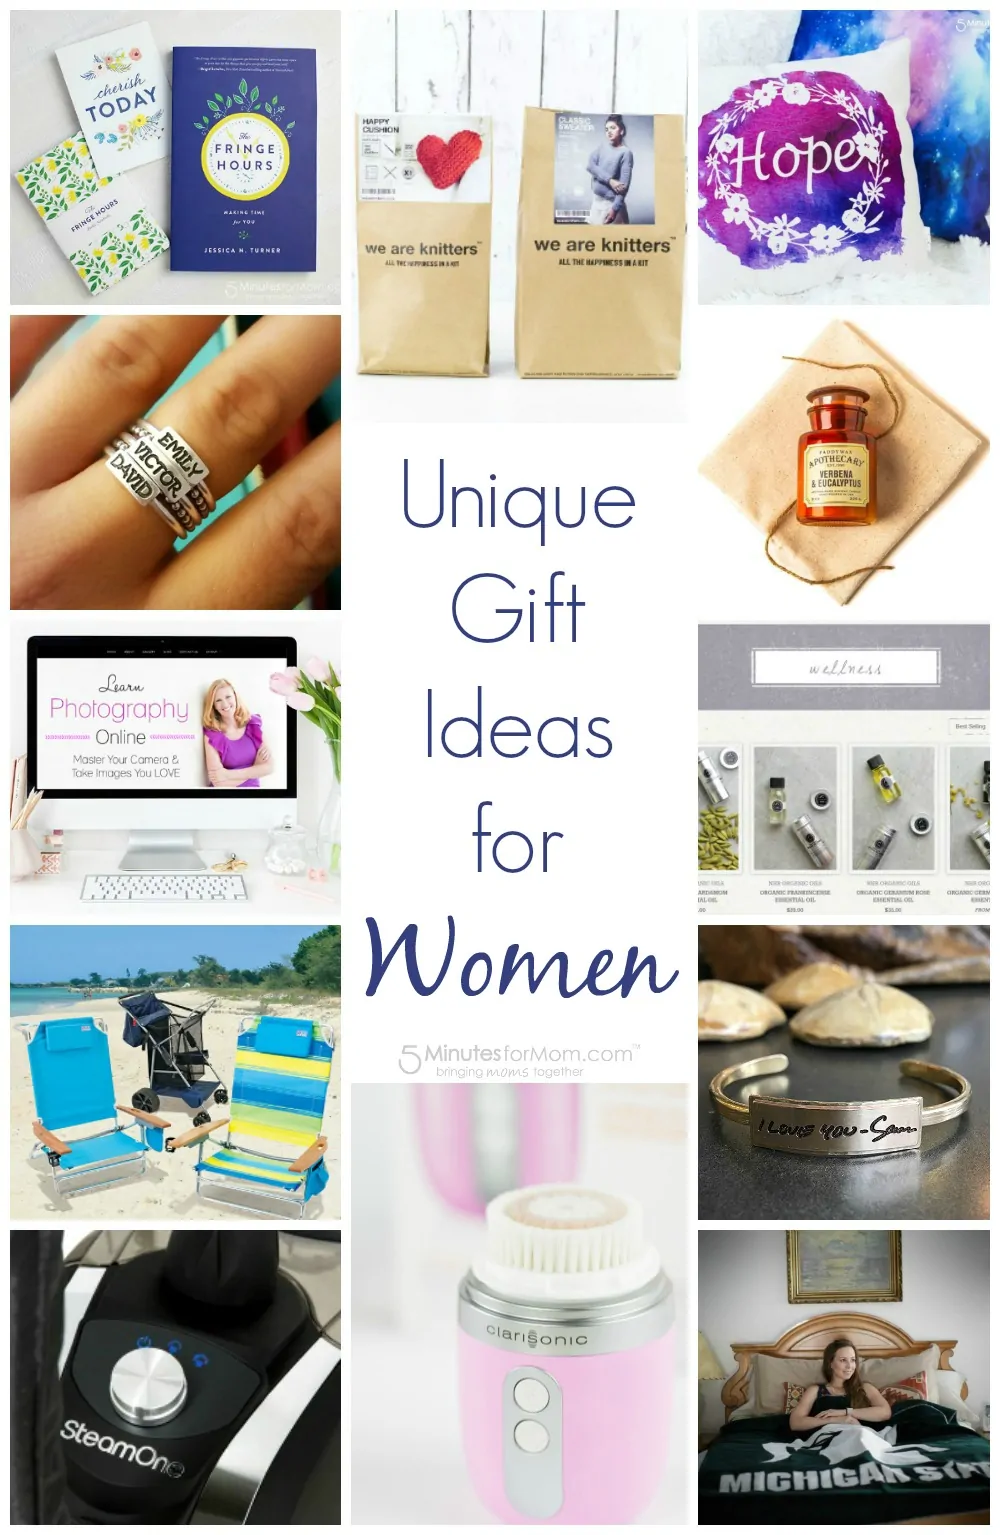 Gift Guide - Unique gift ideas for women